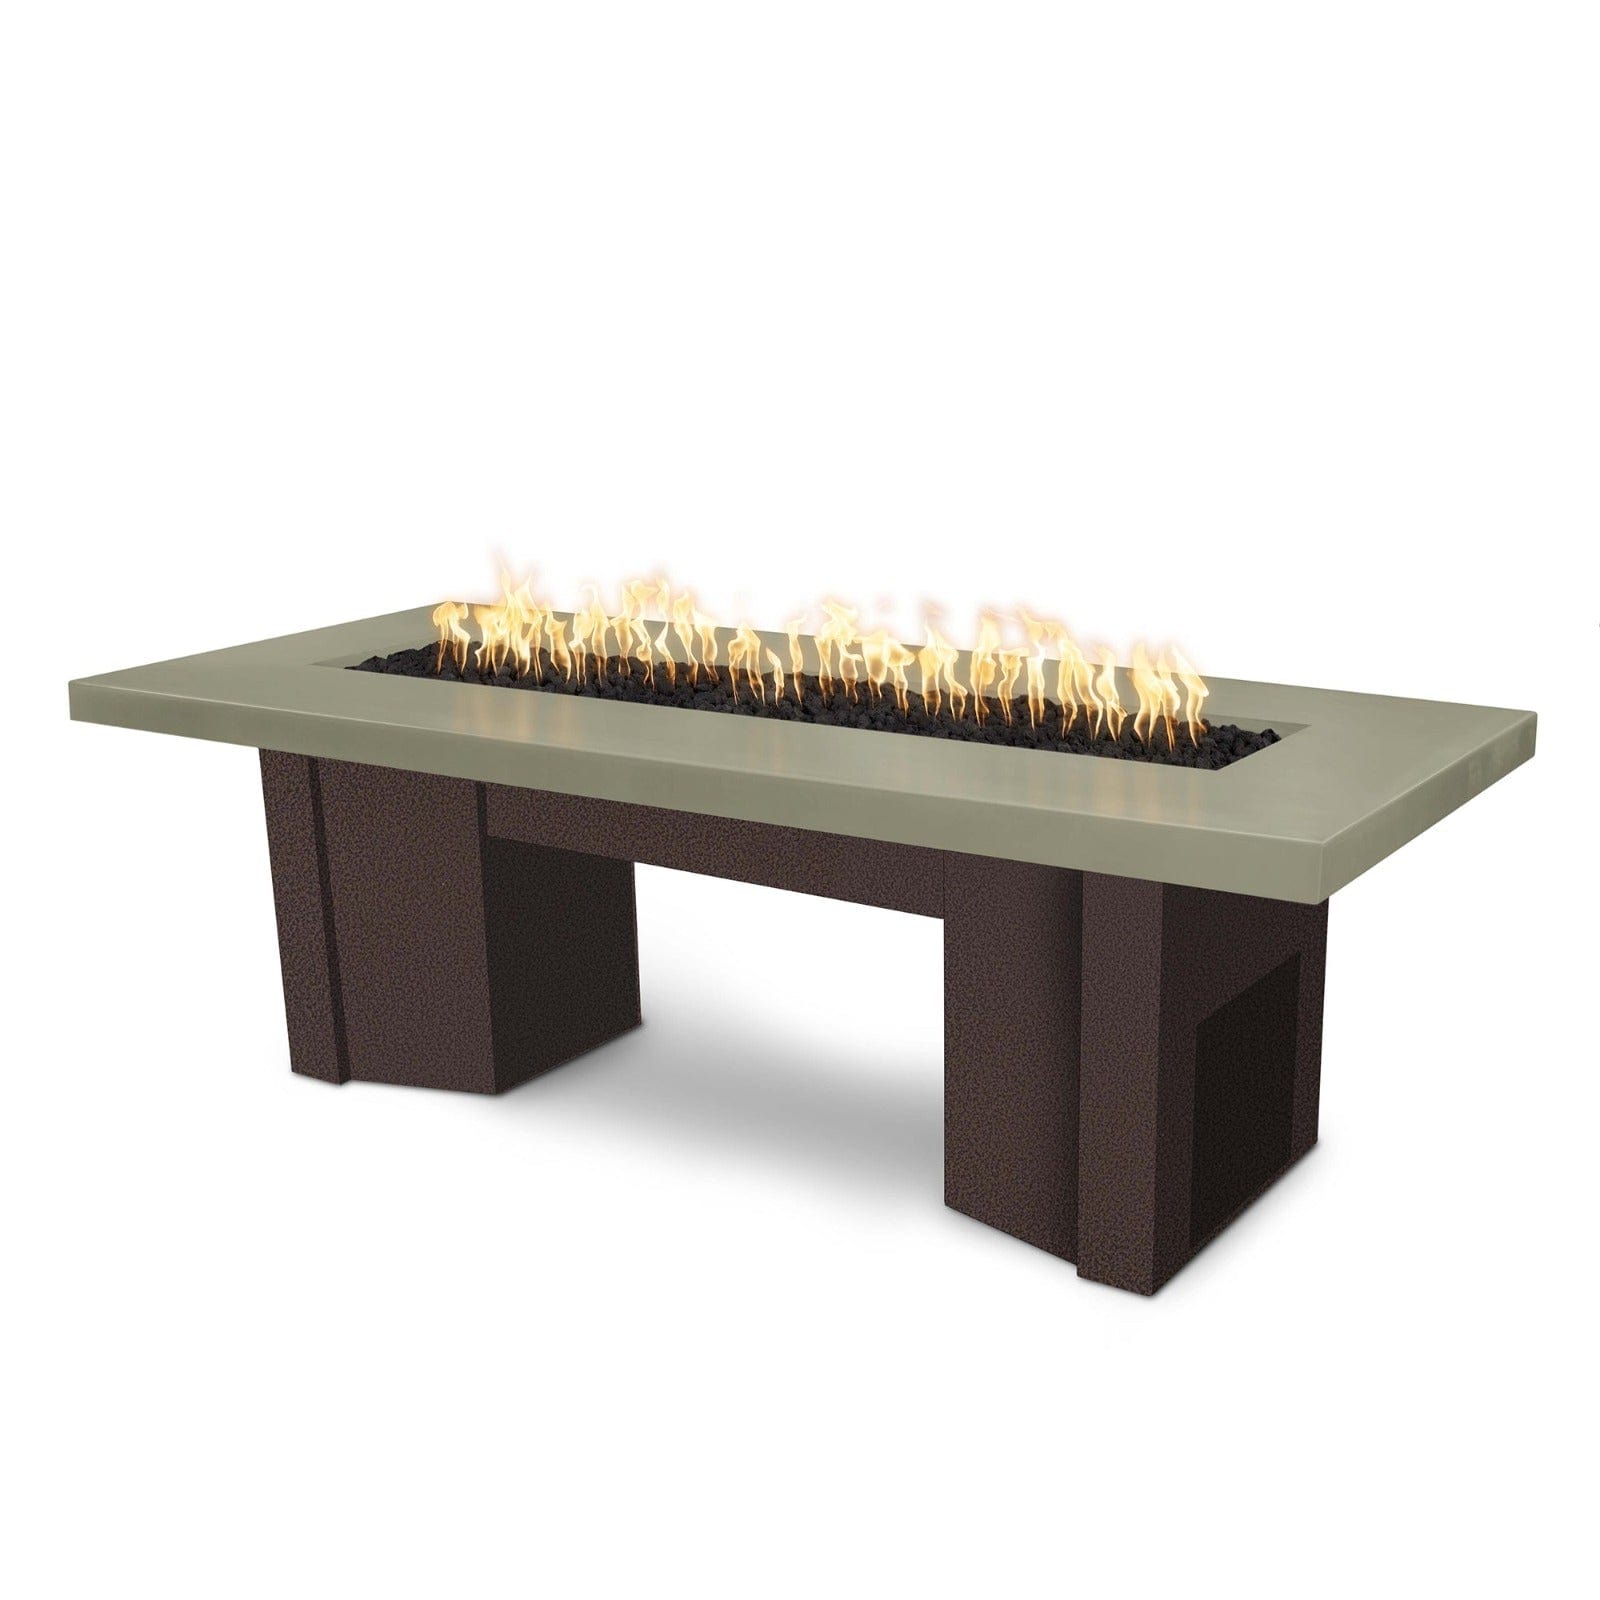 The Outdoor Plus Fire Features Ash (-ASH) / Copper Vein Powder Coated Steel (-CPV) The Outdoor Plus 60" Alameda Fire Table Smooth Concrete in Natural Gas - Match Lit with Flame Sense System / OPT-ALMGFRC60FSML-NG